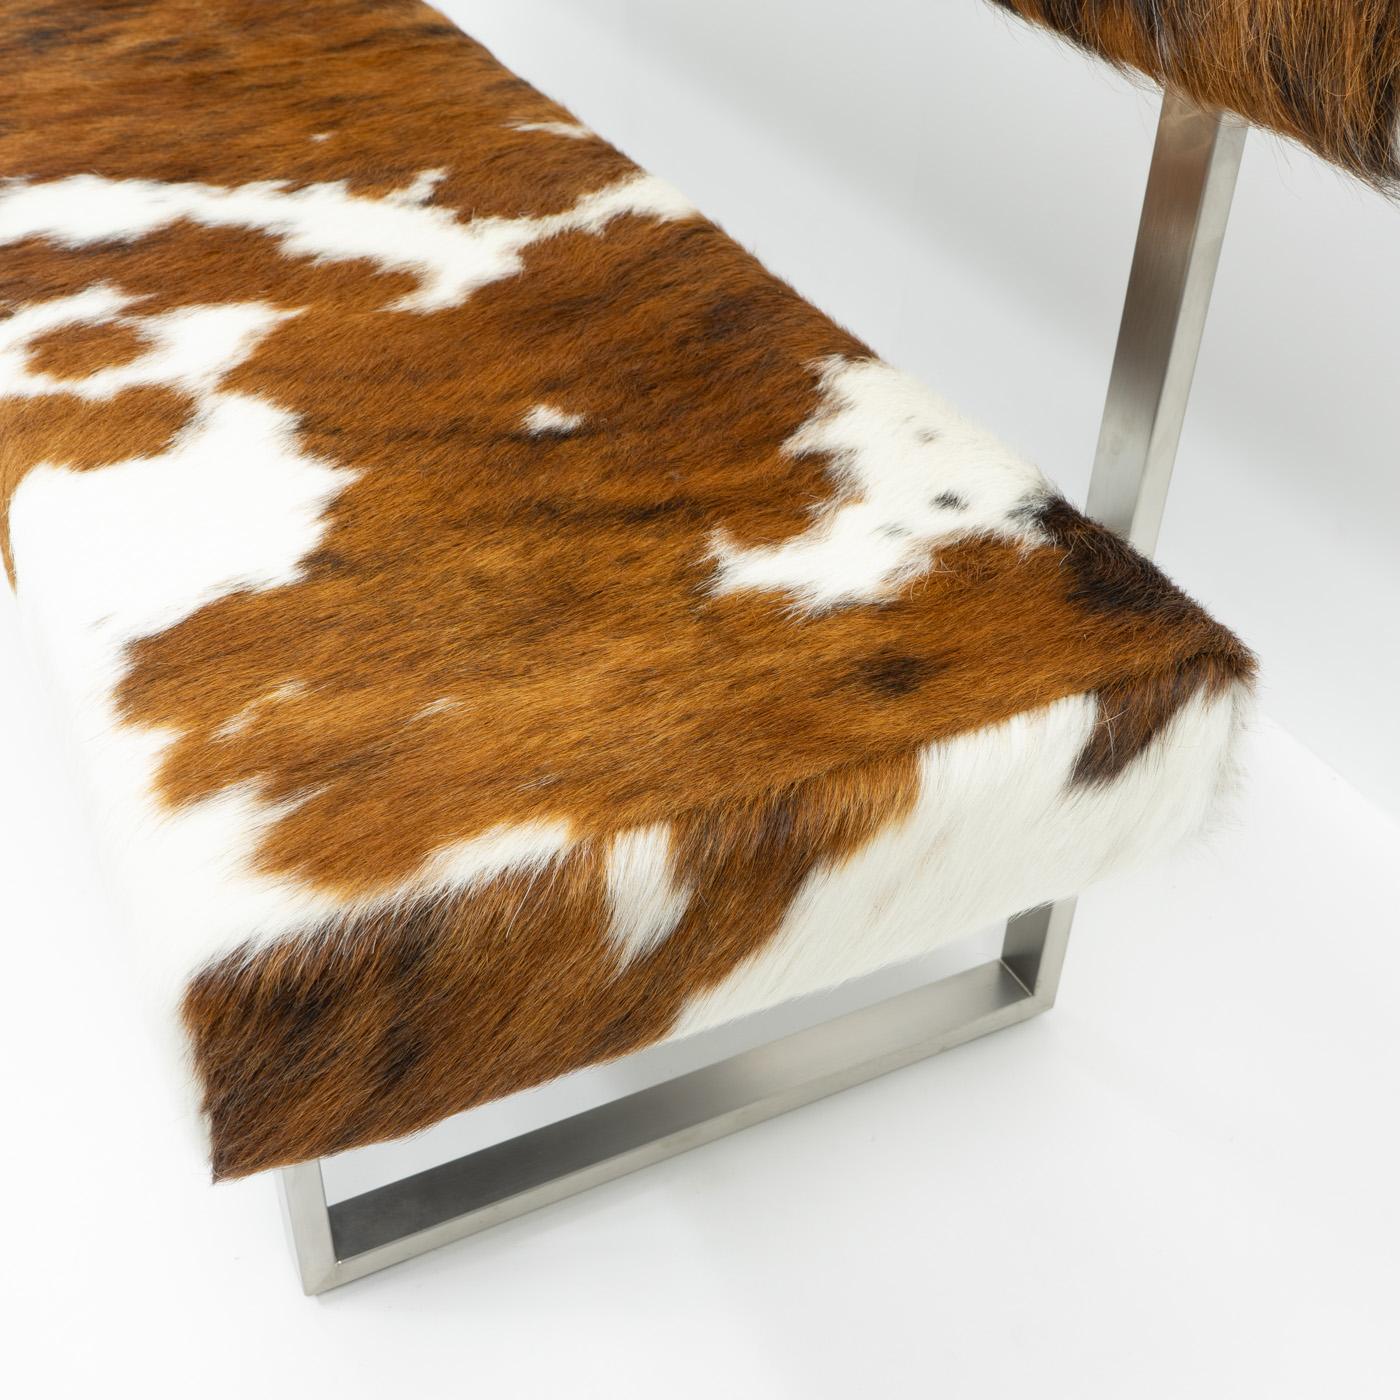 Swiss Design Permesso Bench in cowhide, by Girsberger - 2000s For Sale 5